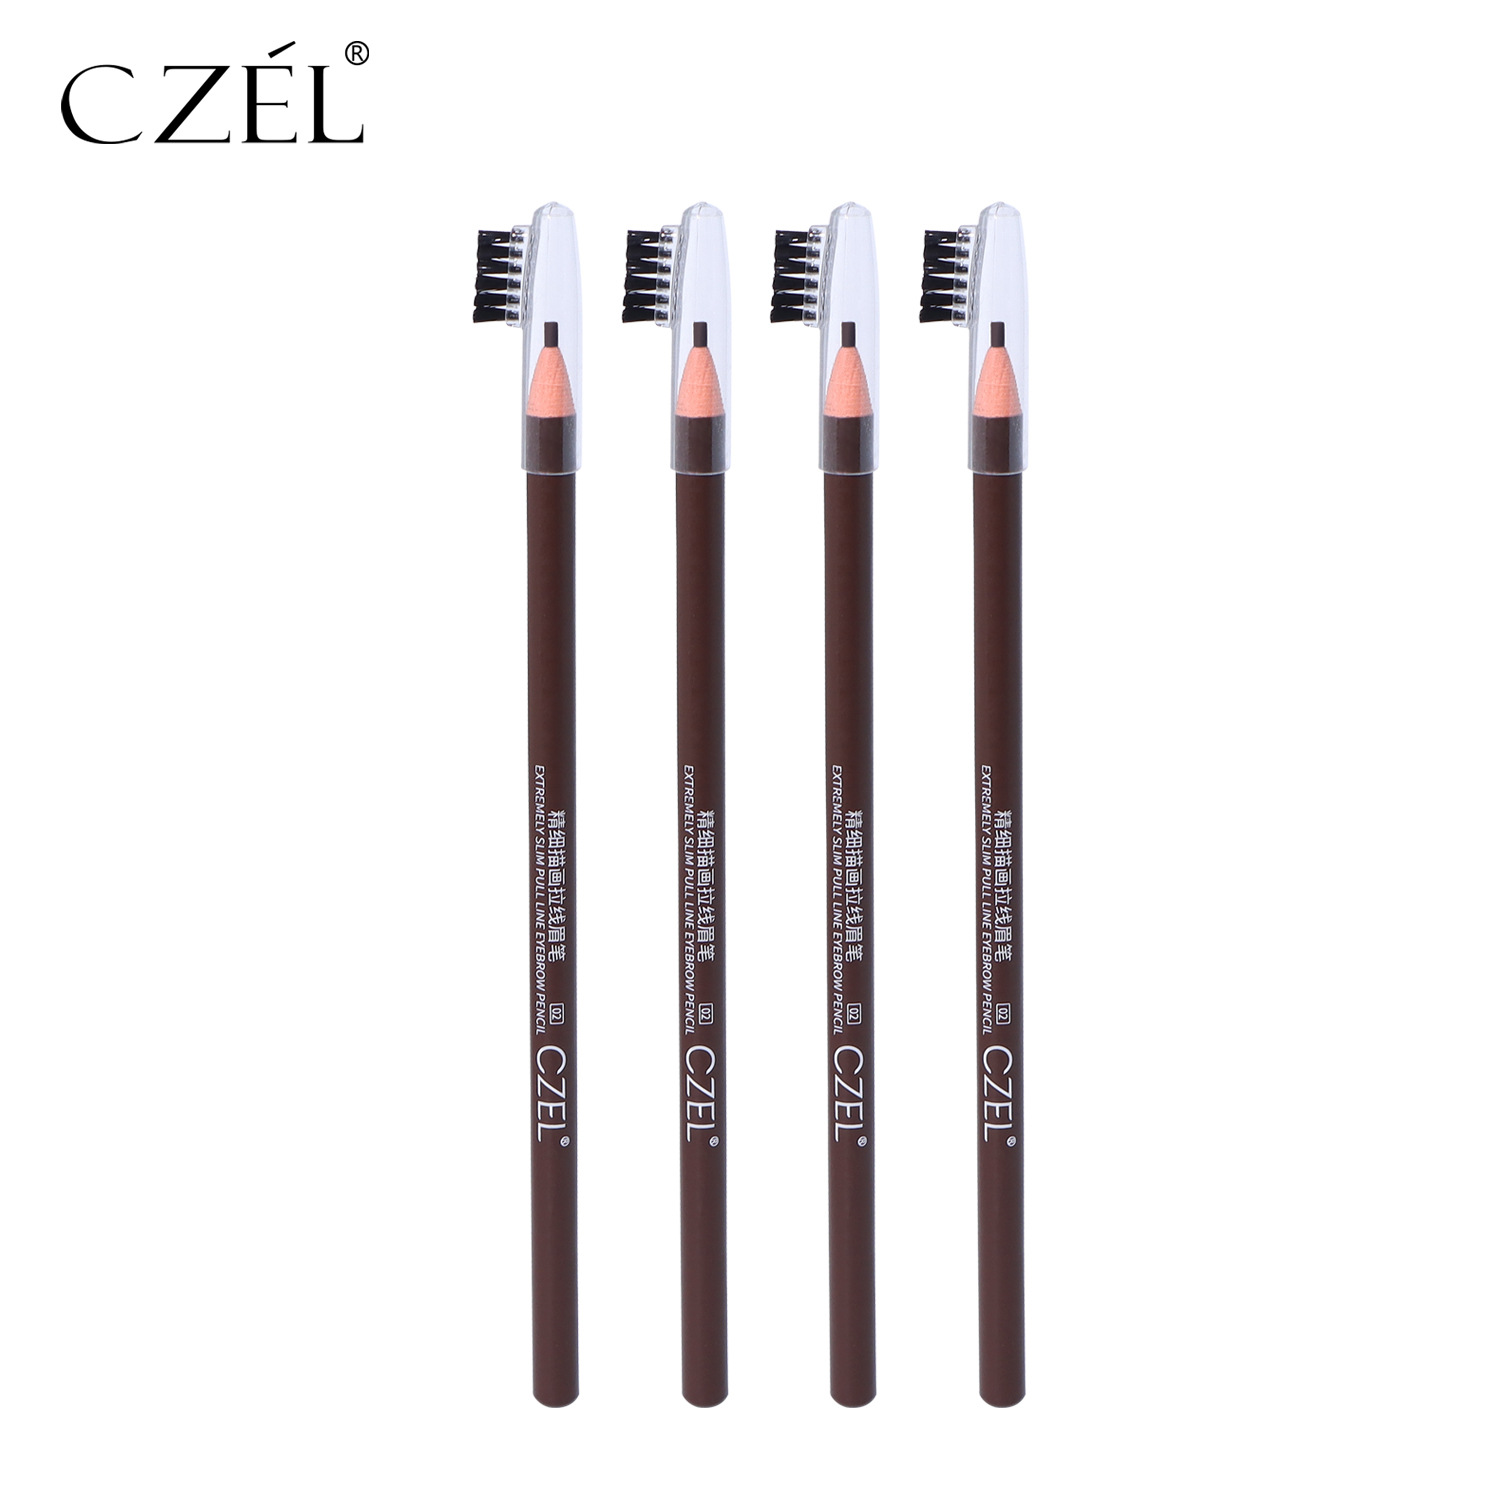 Czel/New Product 2mm Extremely Fine Line Drawing Eyebrow Pencil Waterproof Not Smudge Easy to Dye and Color Mom Student Support Sample Eyebrow Pencil